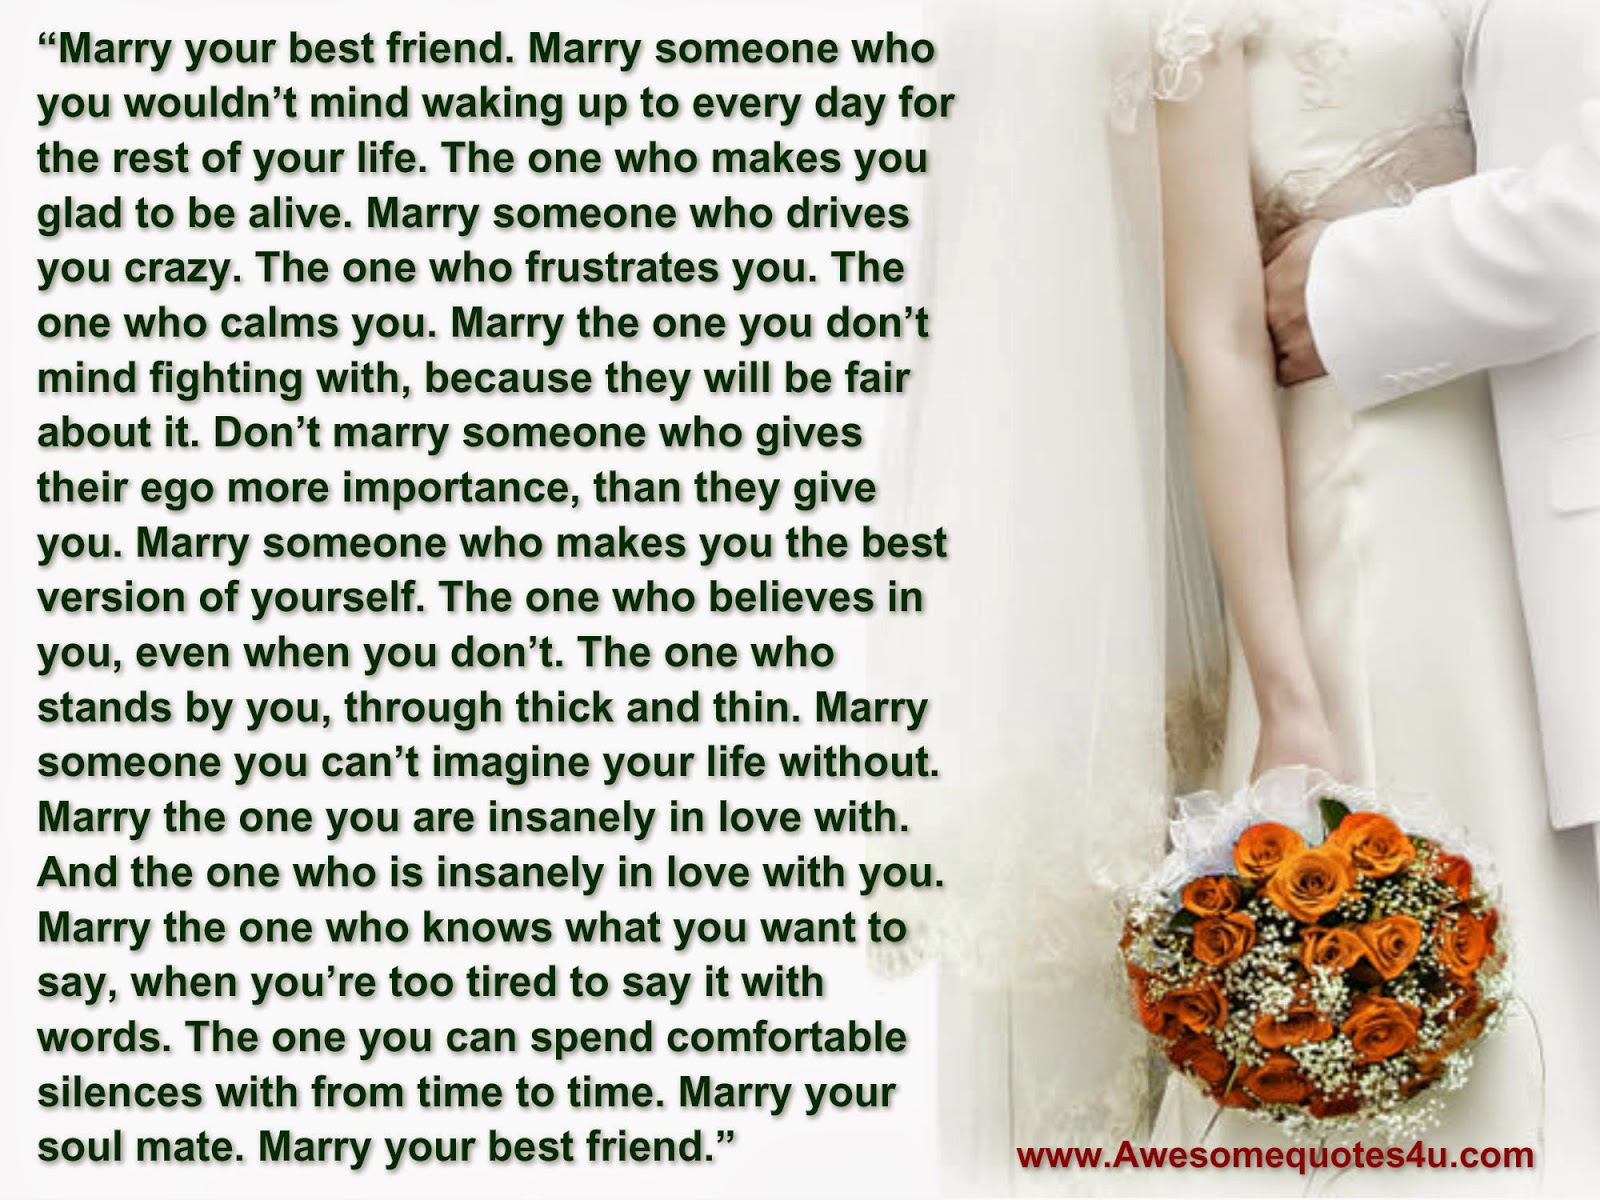 Marry your best friend quote